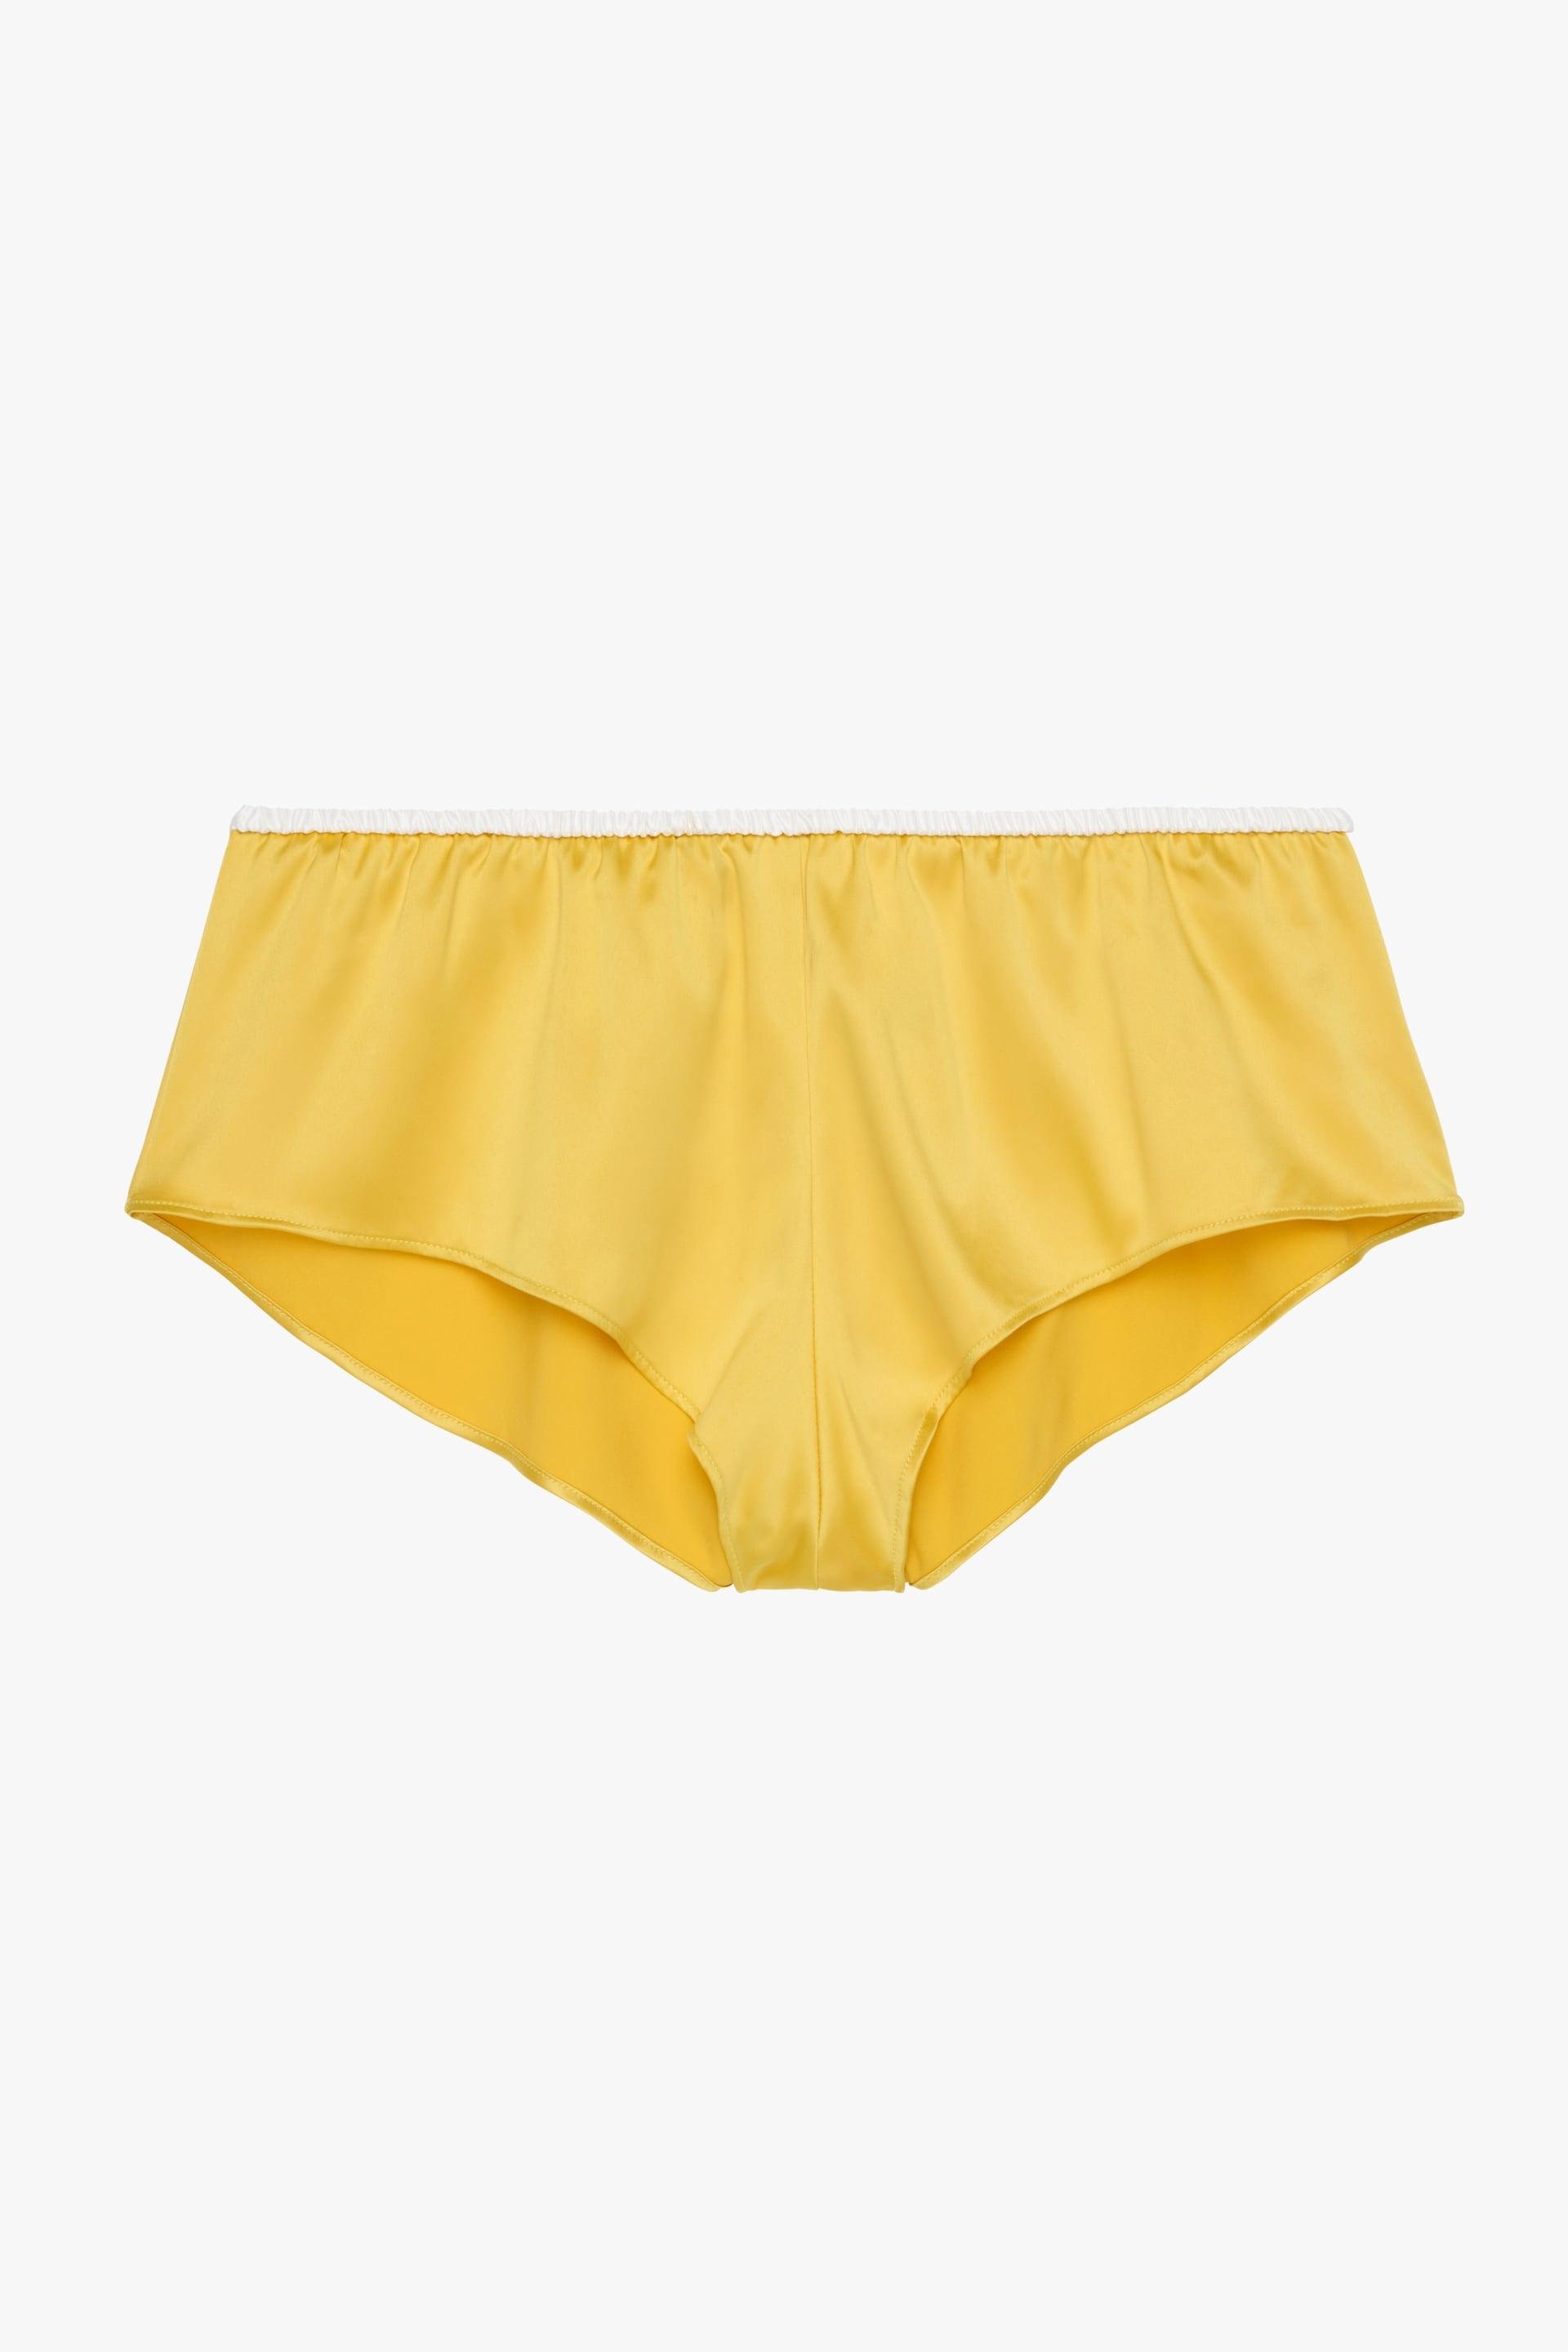 SATIN EFFECT SHORTS LIMITED EDITION by ZARA